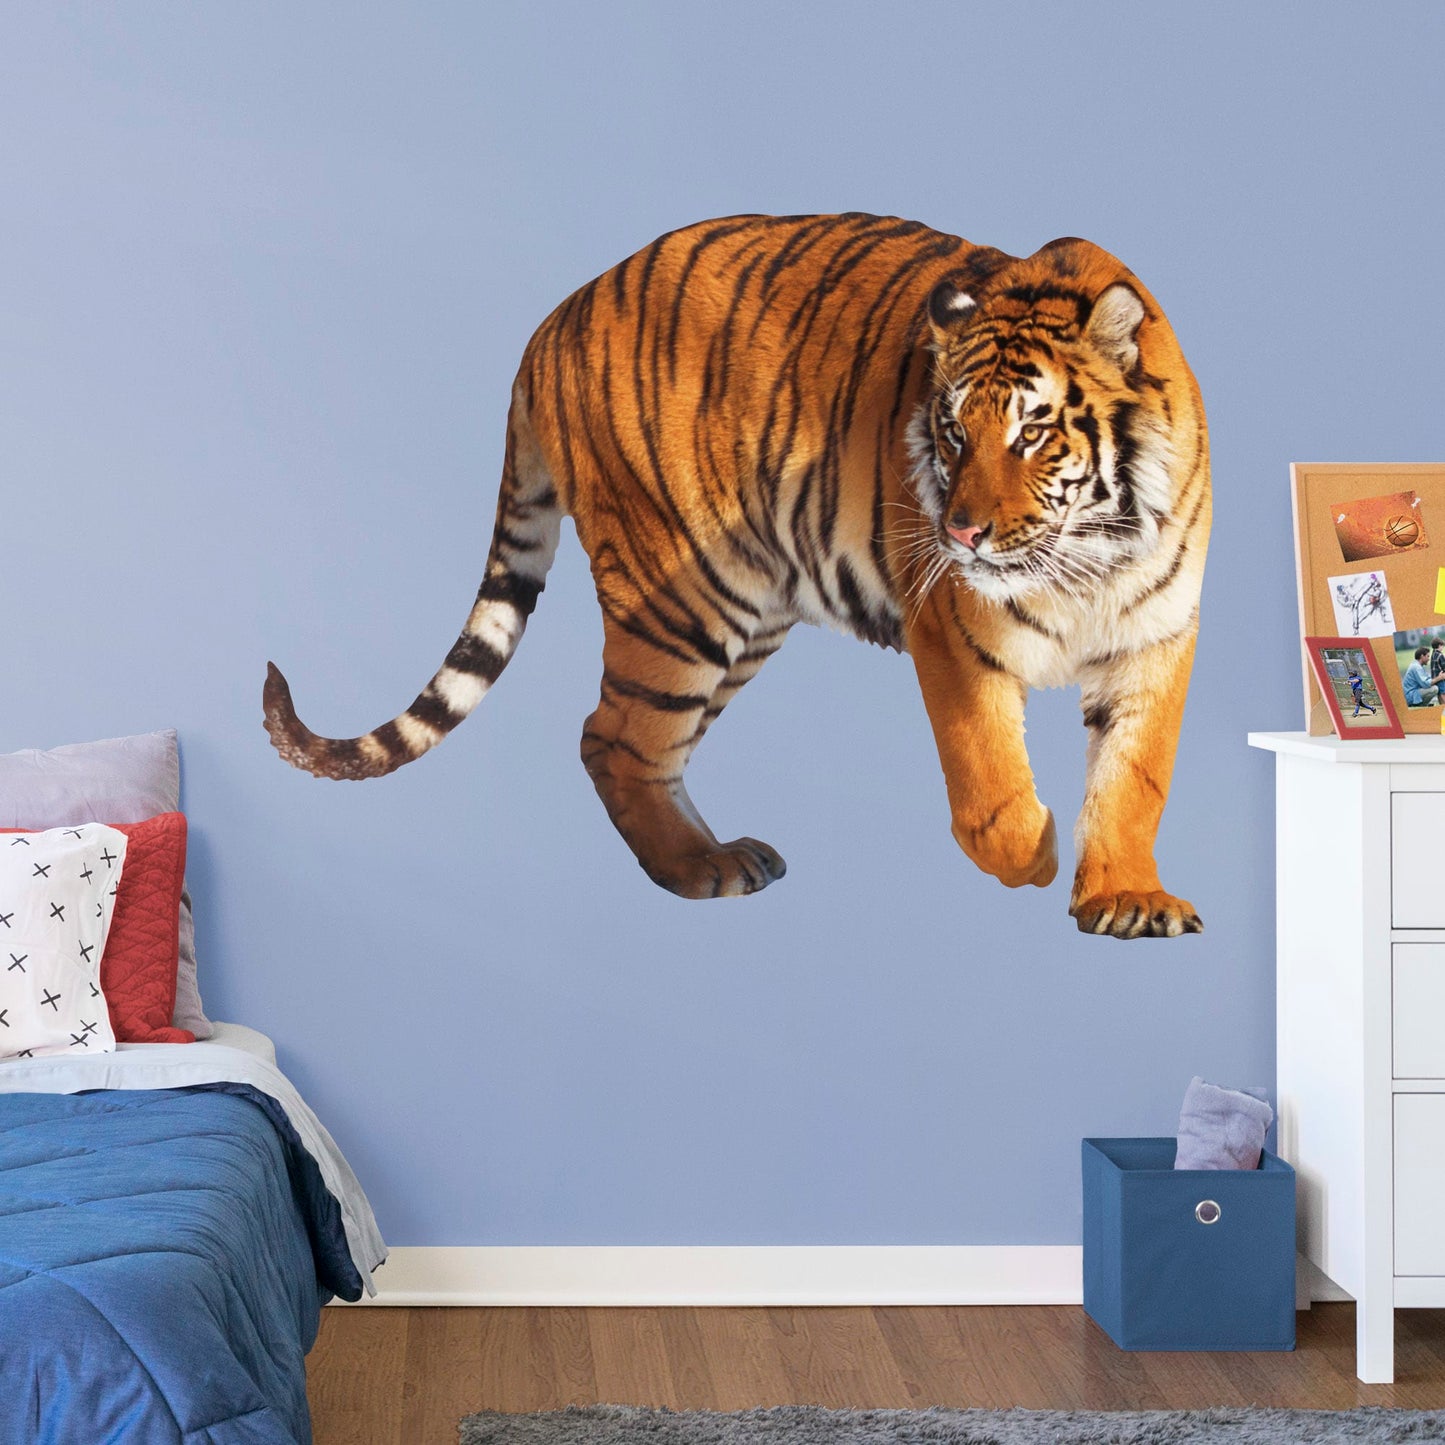 Giant Animal + 2 Licensed Decals (51"W x 39"H)